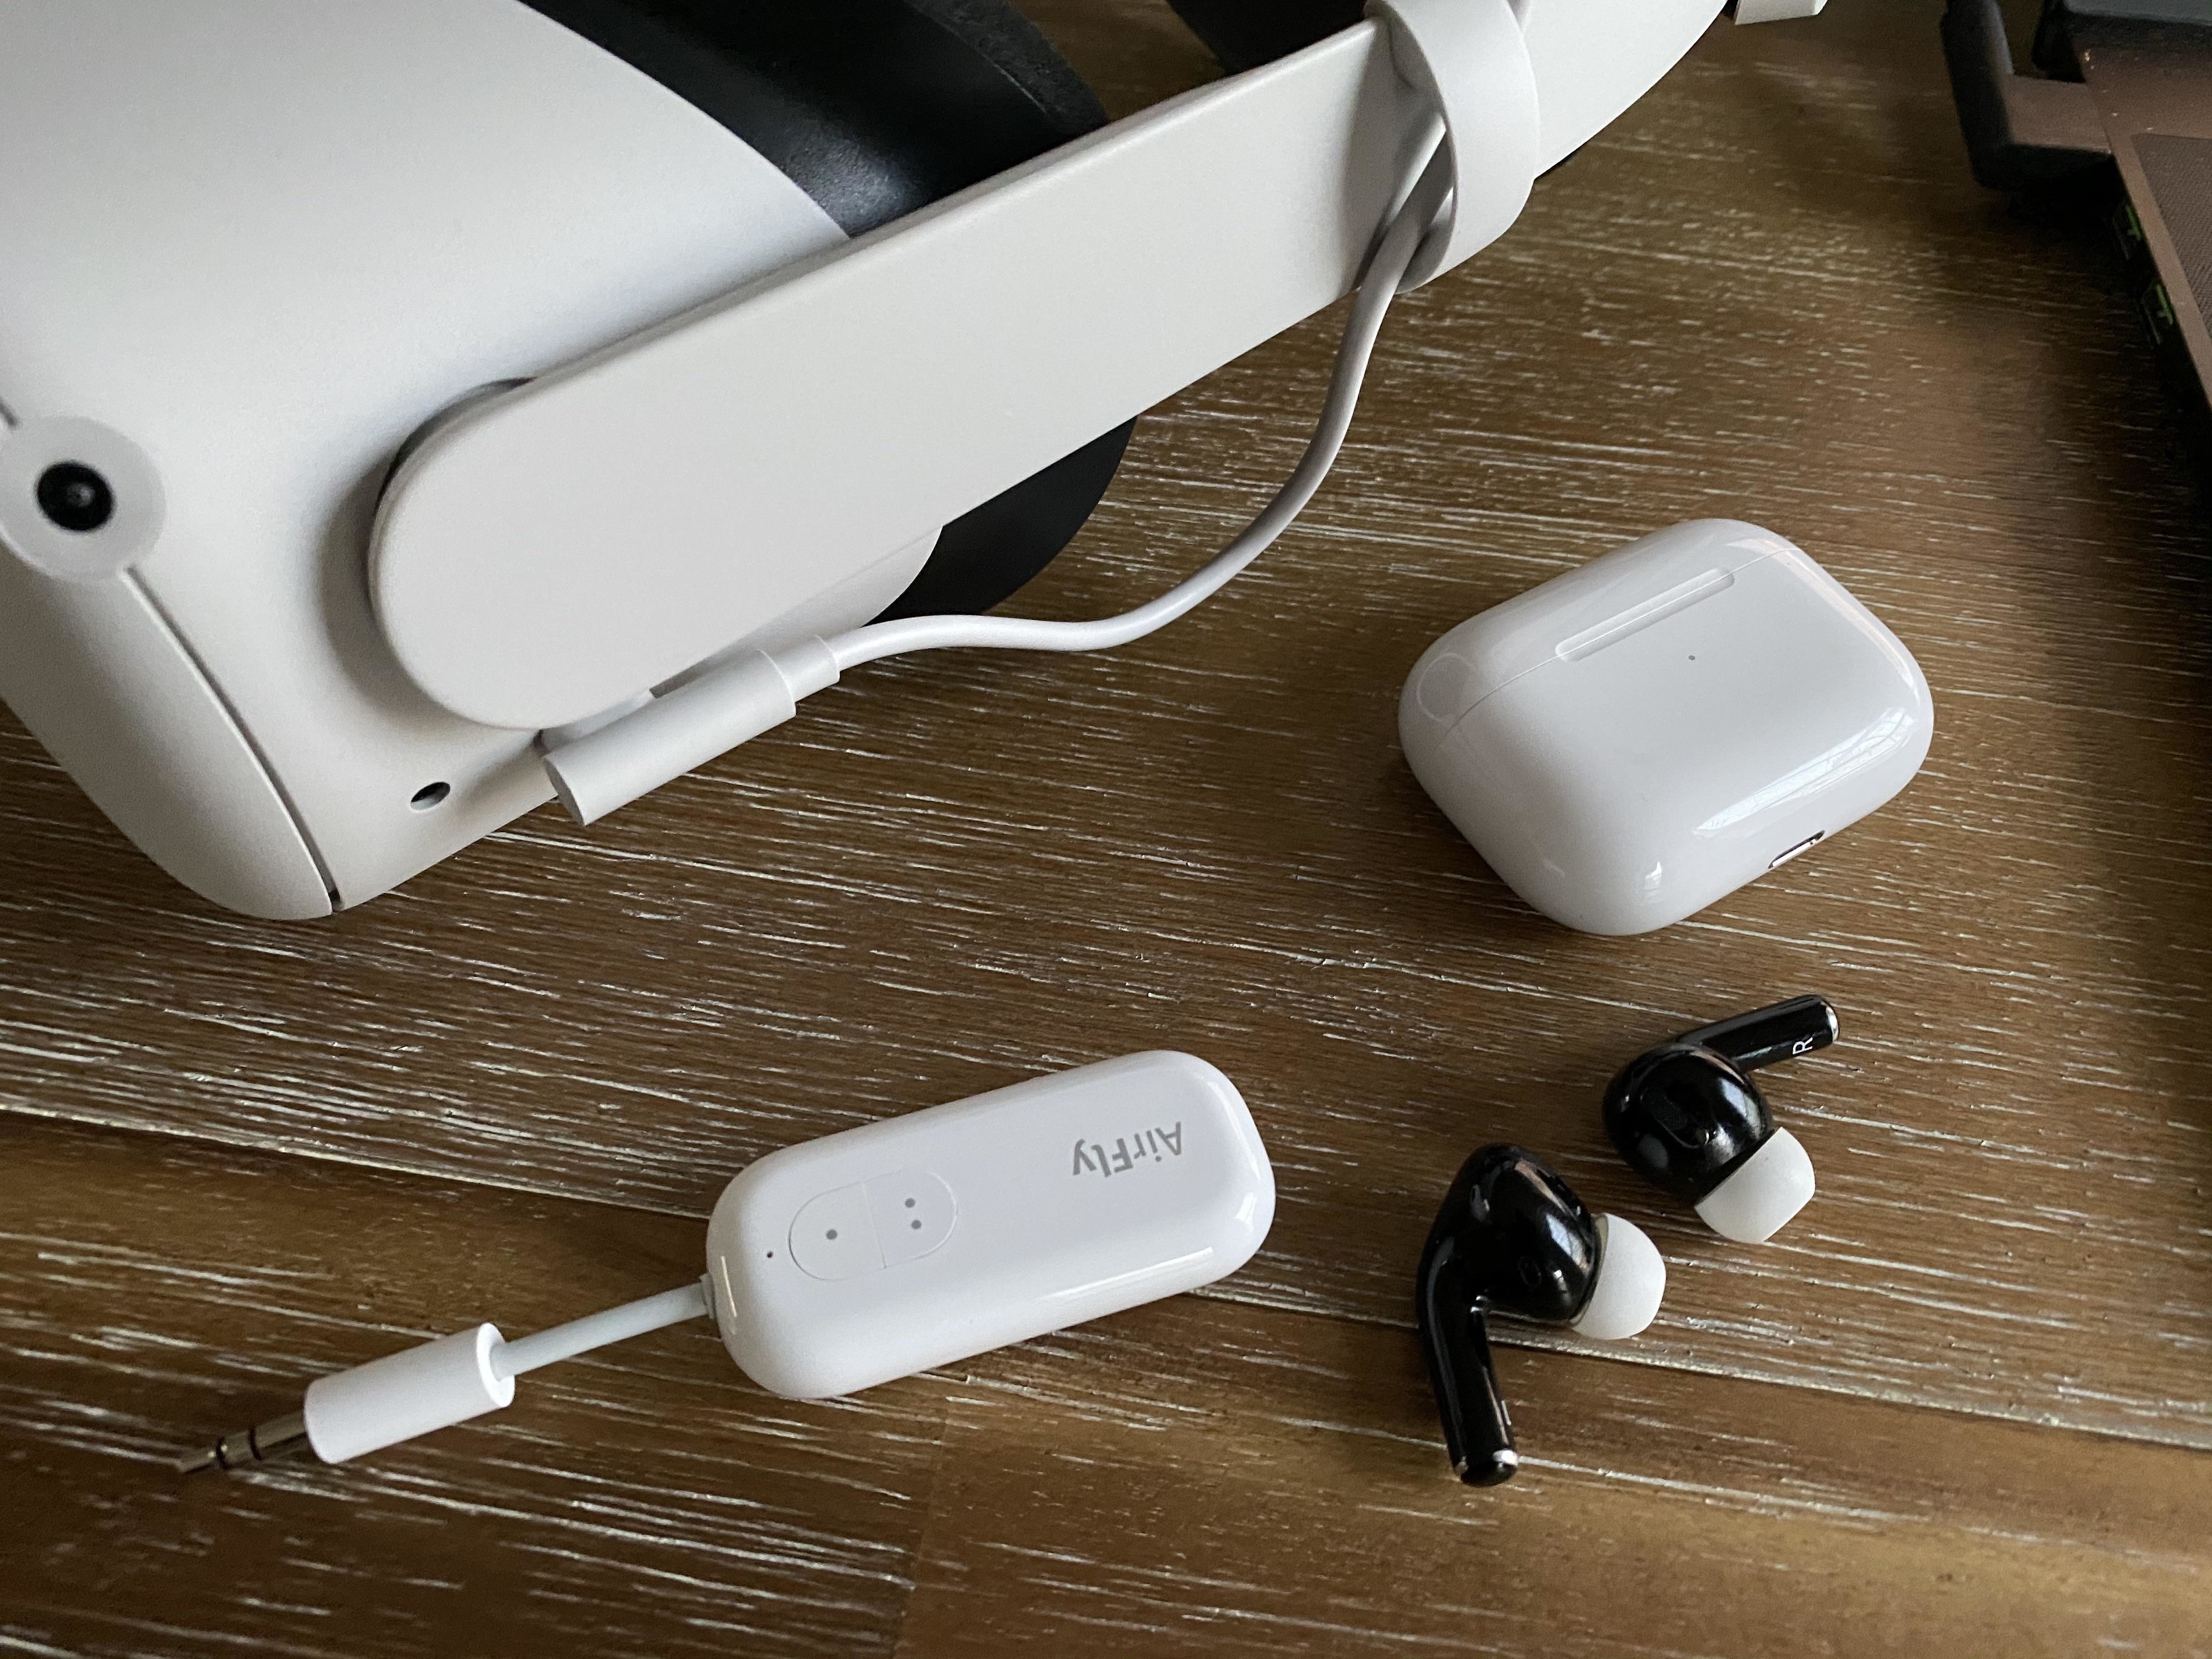 An AirFly device on a table next to wireless headphones